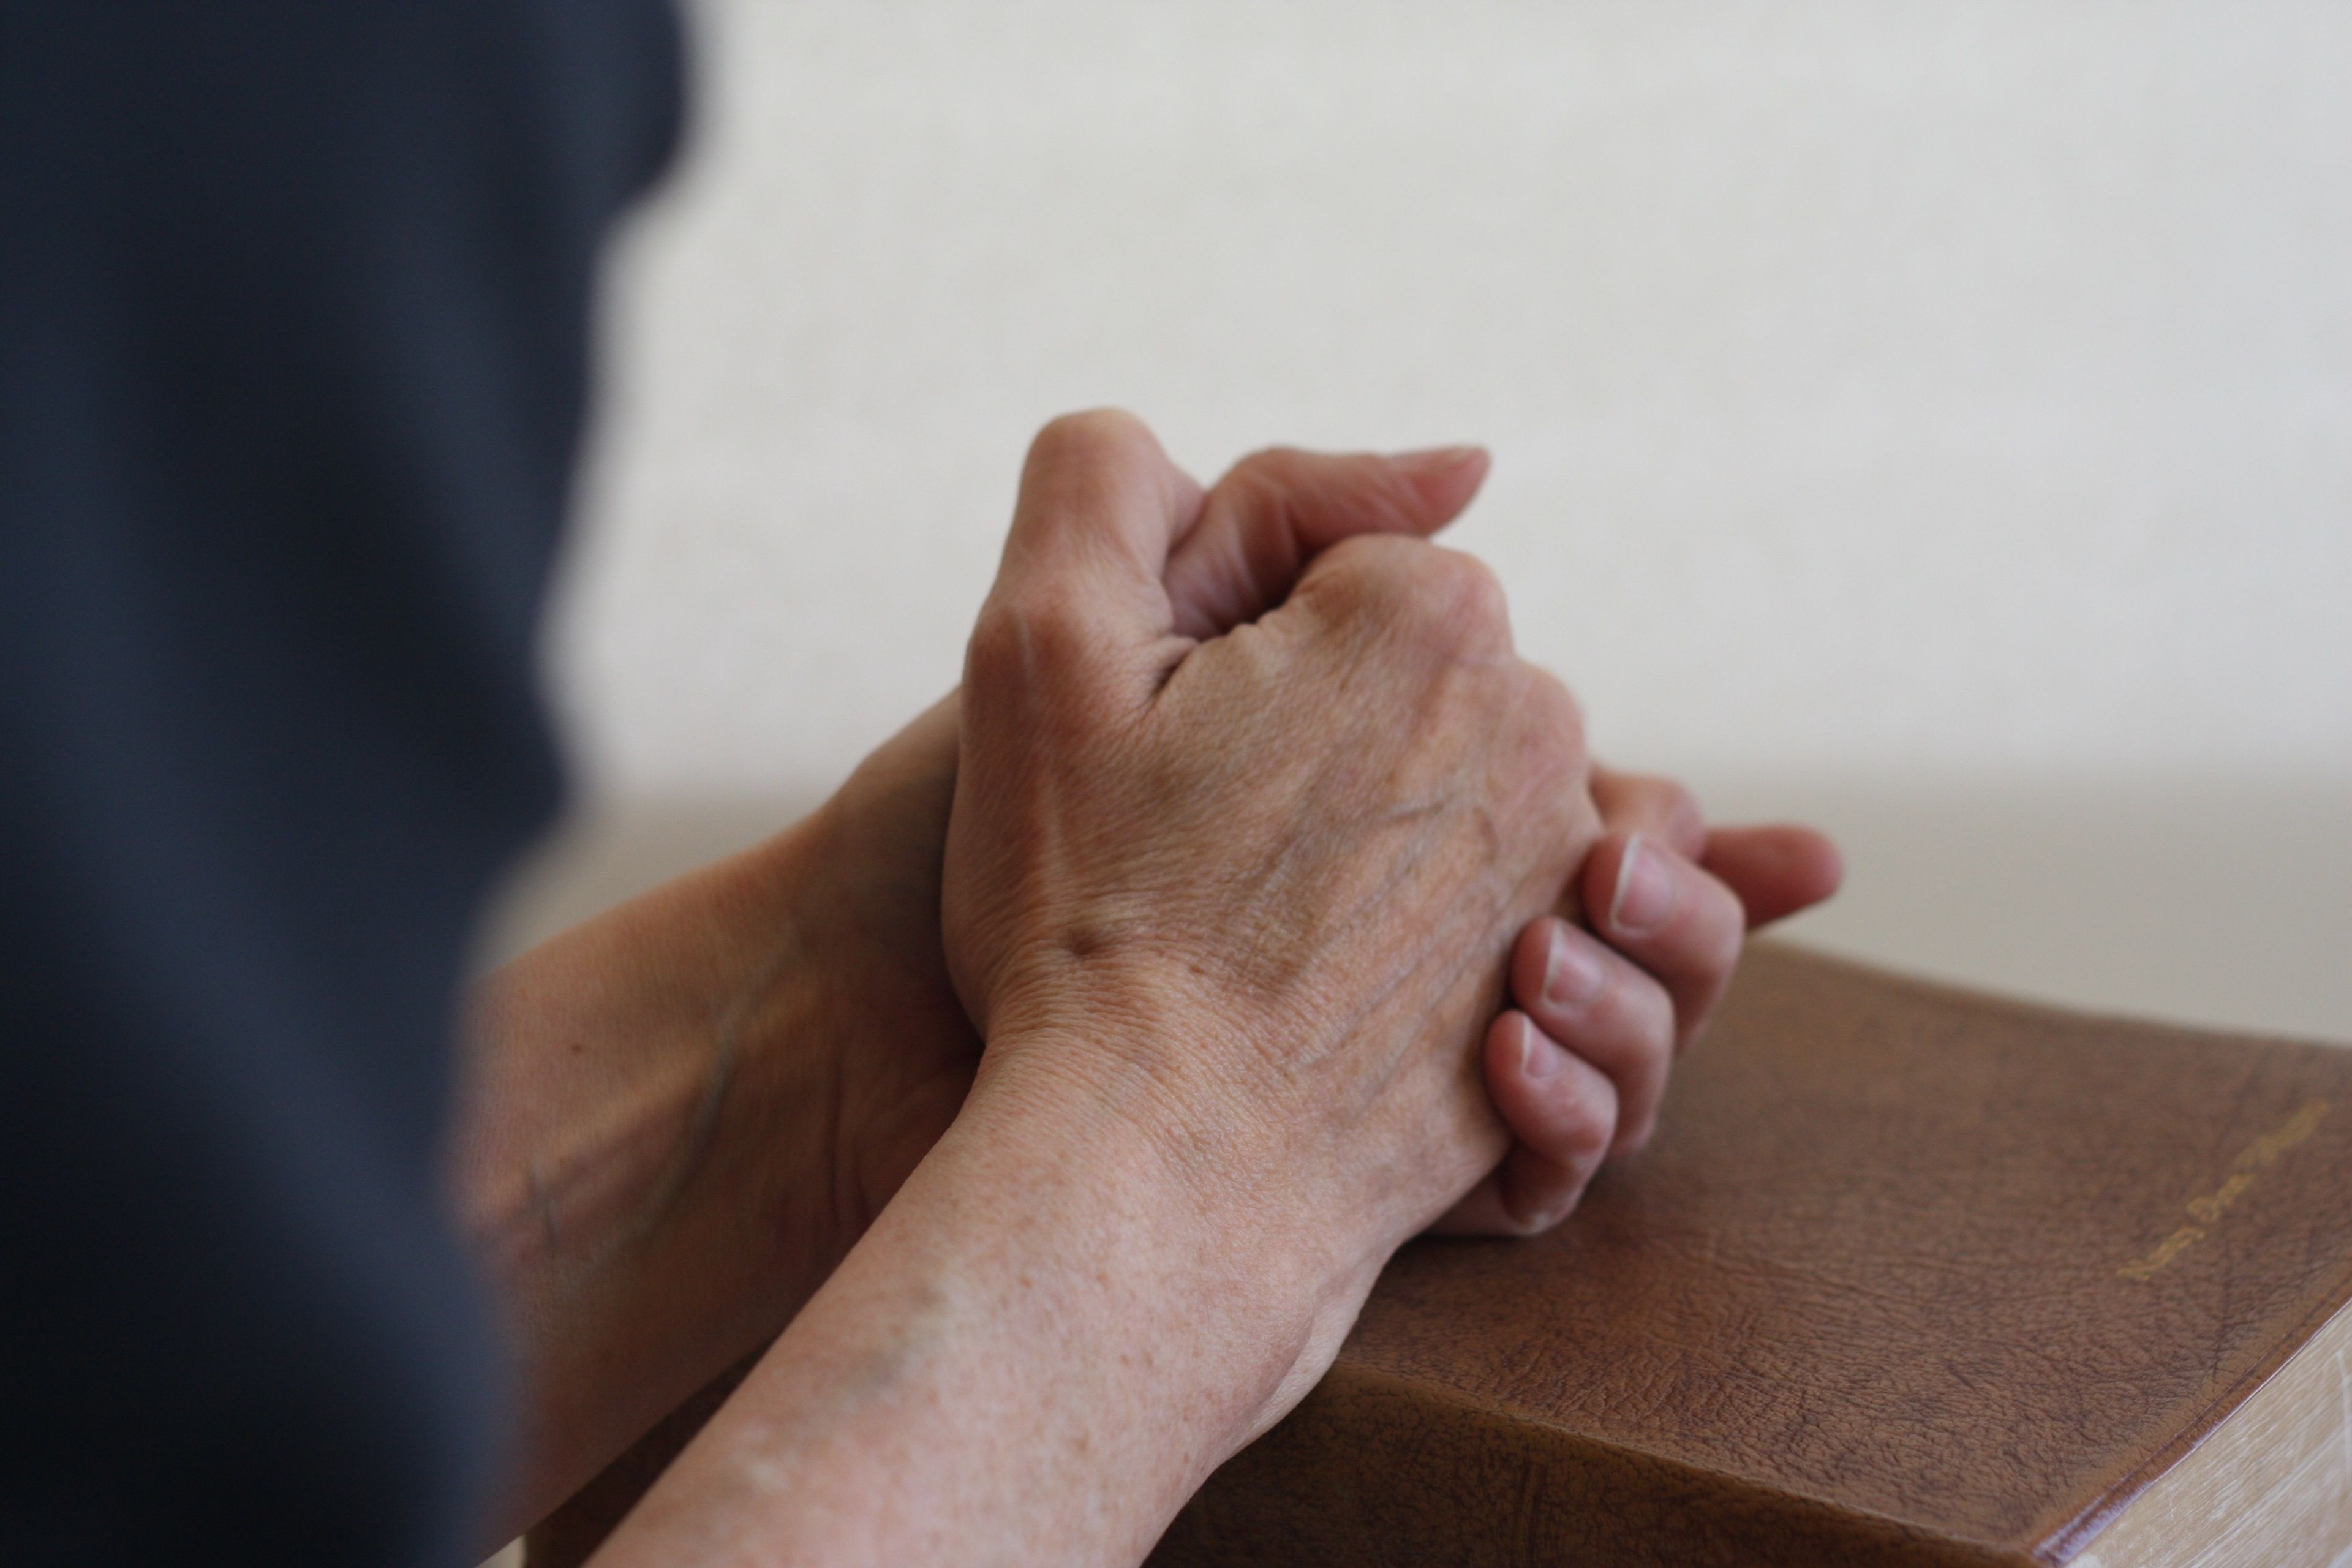 A person prays with clasped hands.